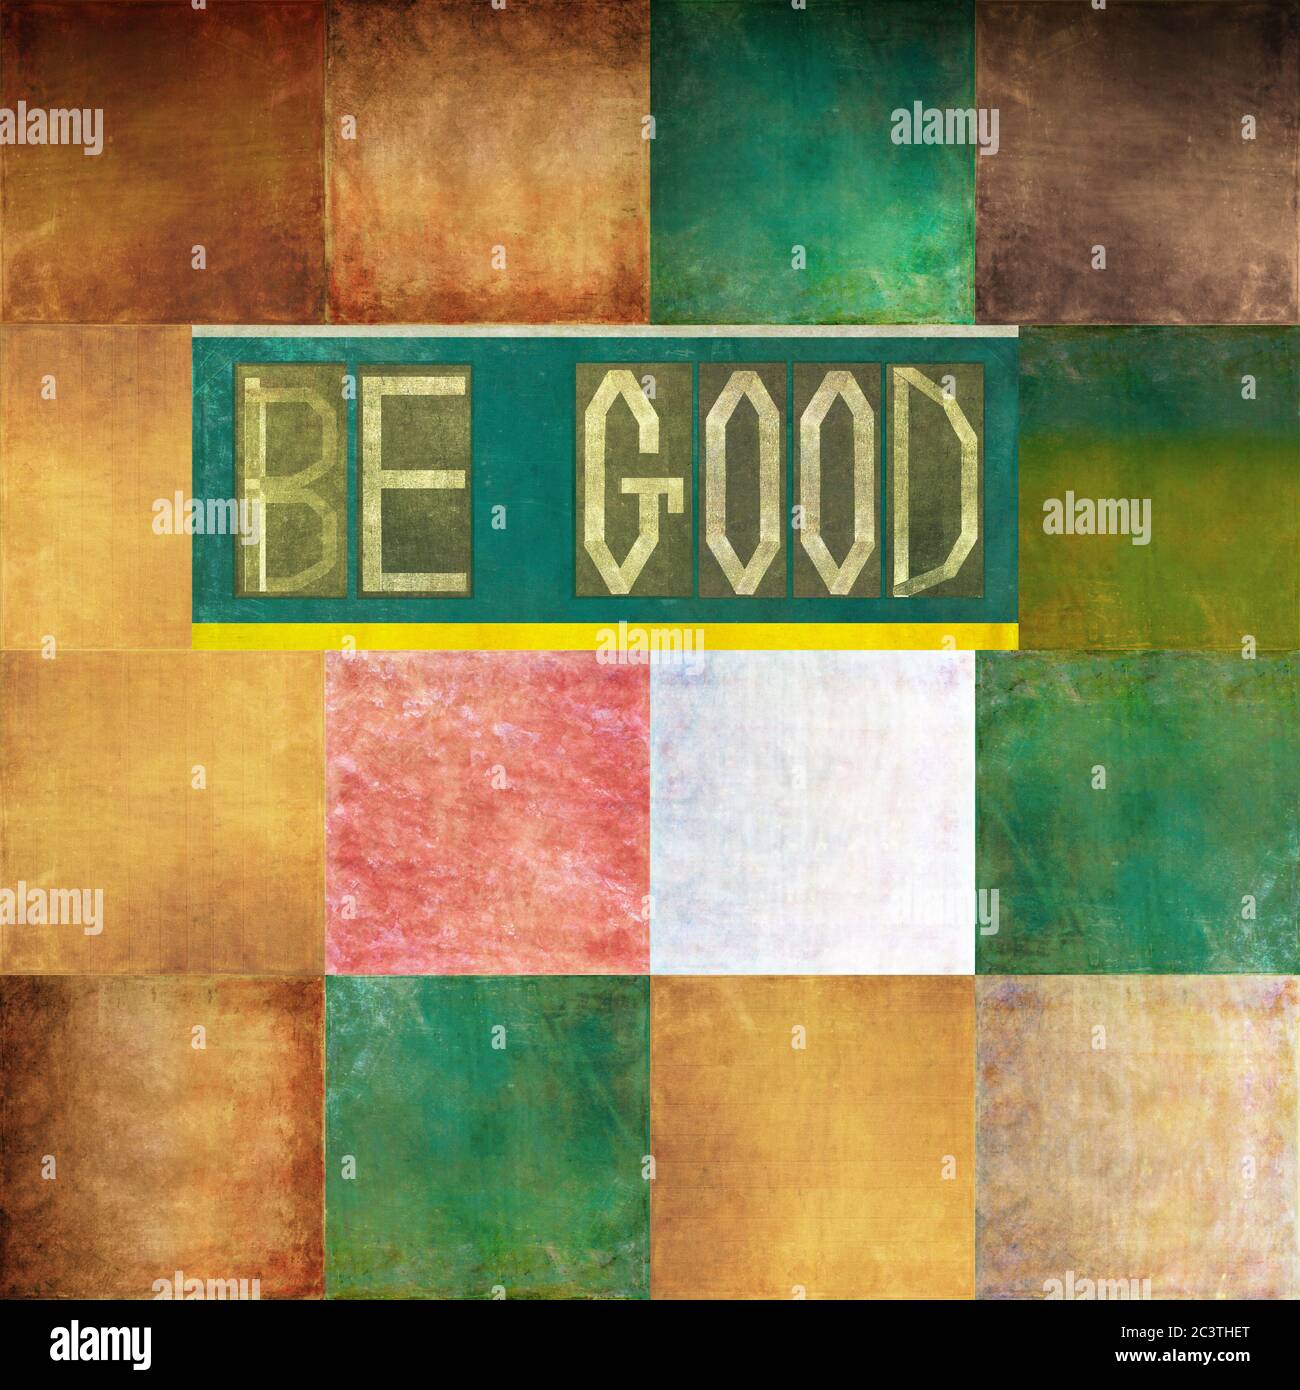 Textured background image and useful design element displaying the word 'Be good' Stock Photo